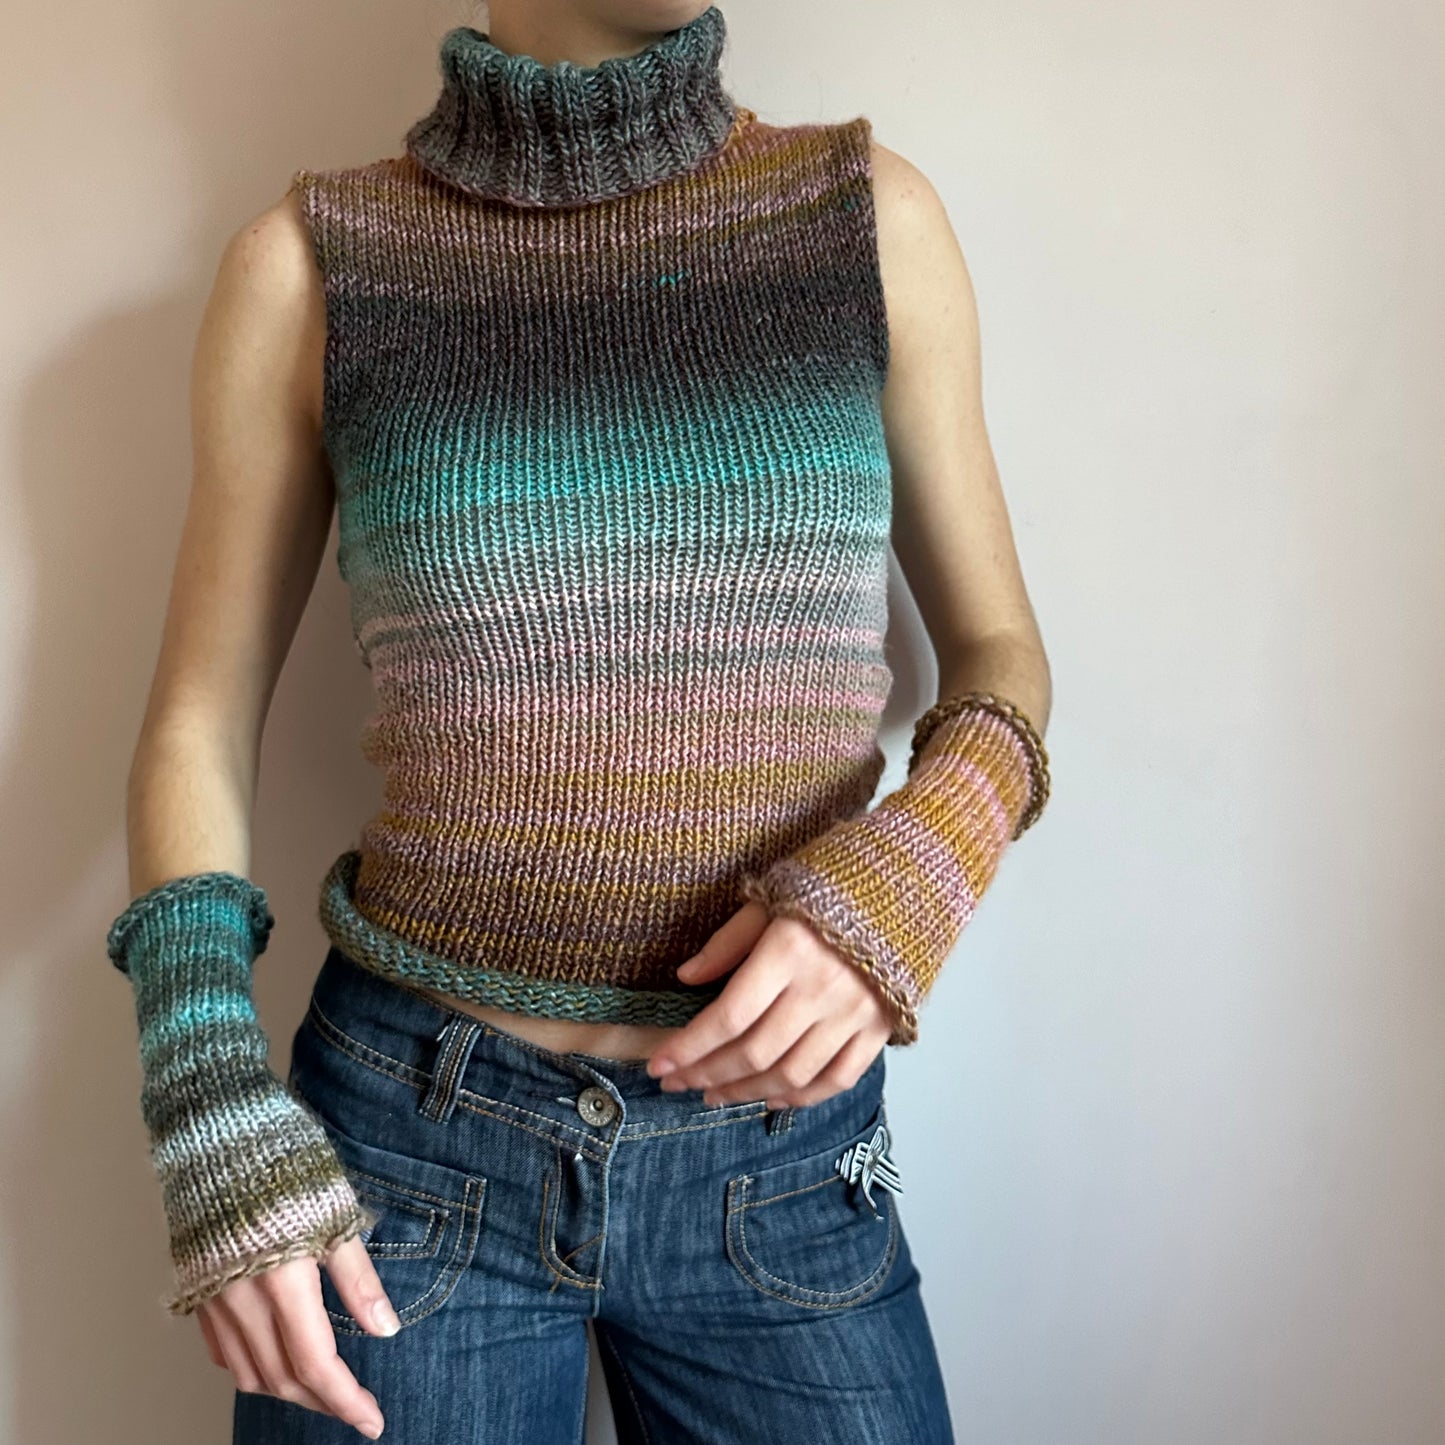 Handmade knitted ombré hand warmers in Alba colourway